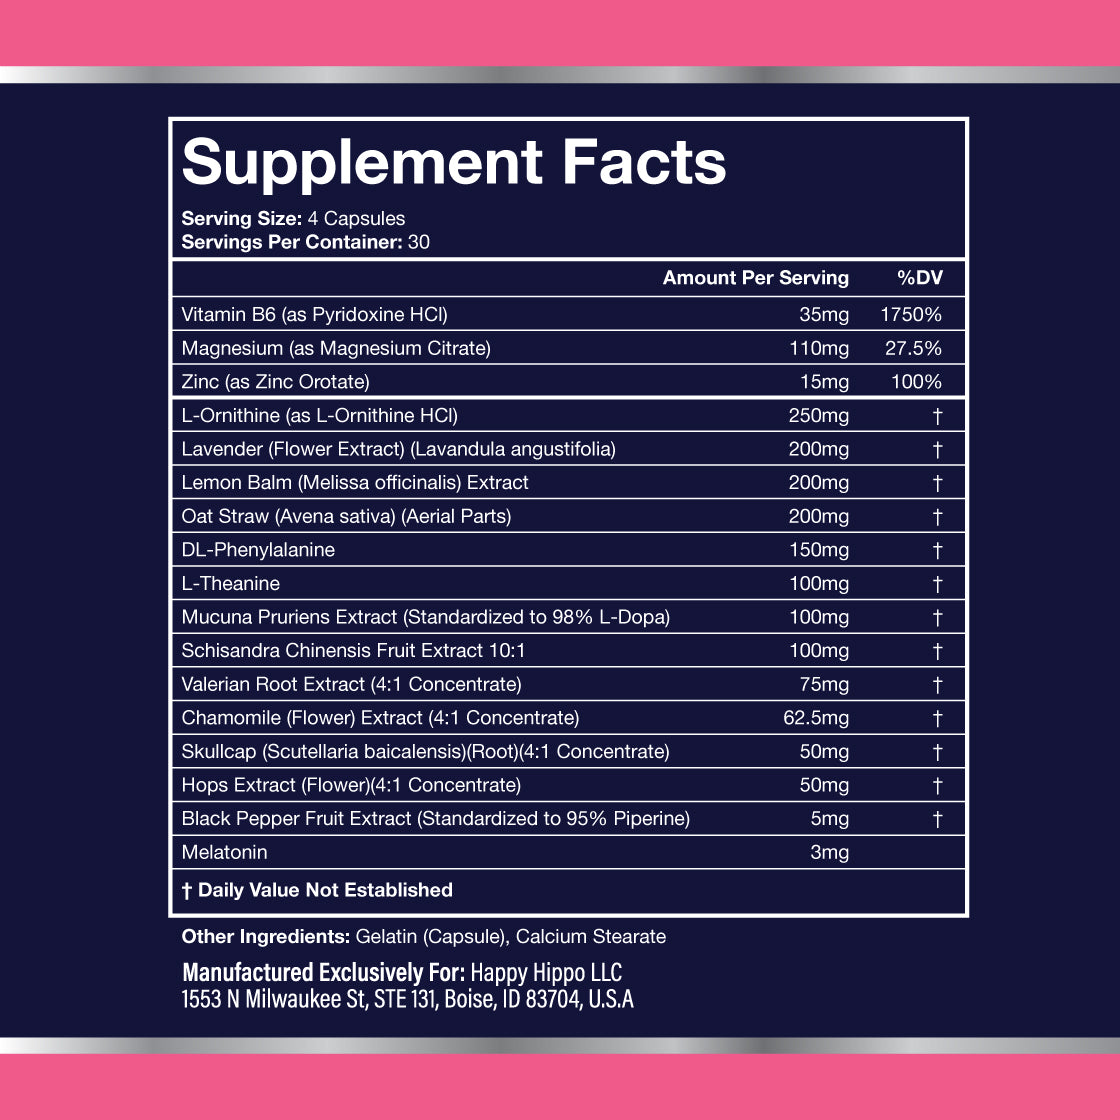 Infographic Botanical Facts for Happy Hippo Sleepytime Natural Sleep Aid Capsules (Hippo Bedtime Formula). Serving size, 4 capsules. 30 servings per container.